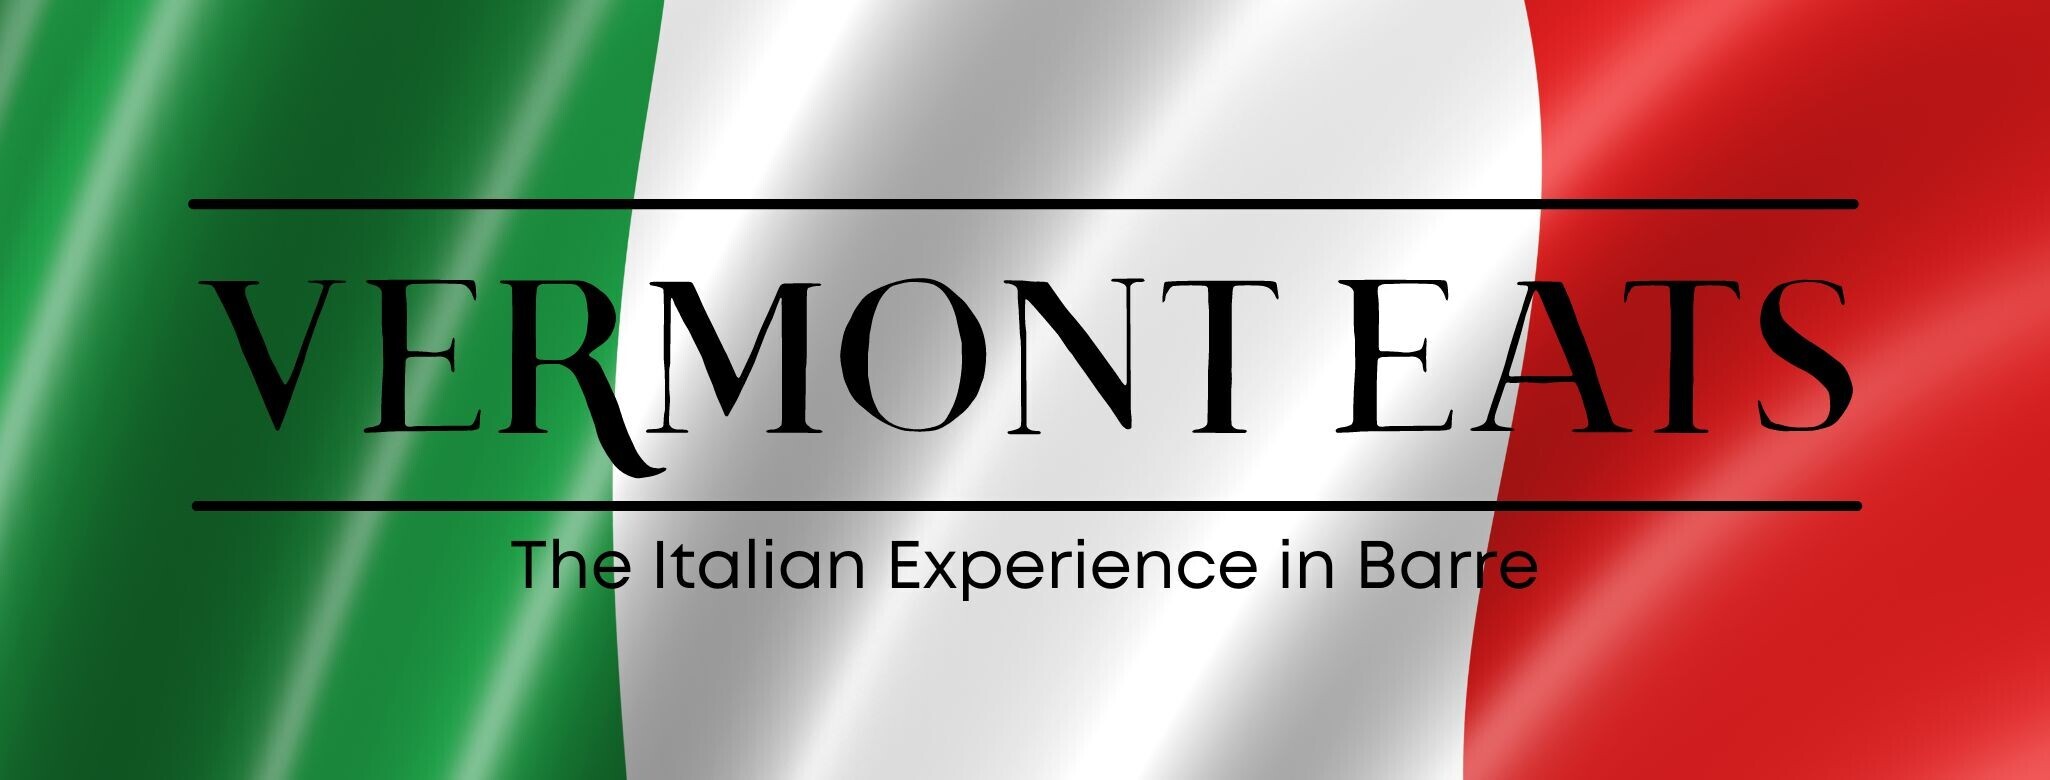 Vermont Eats The Italian Experience in Barre